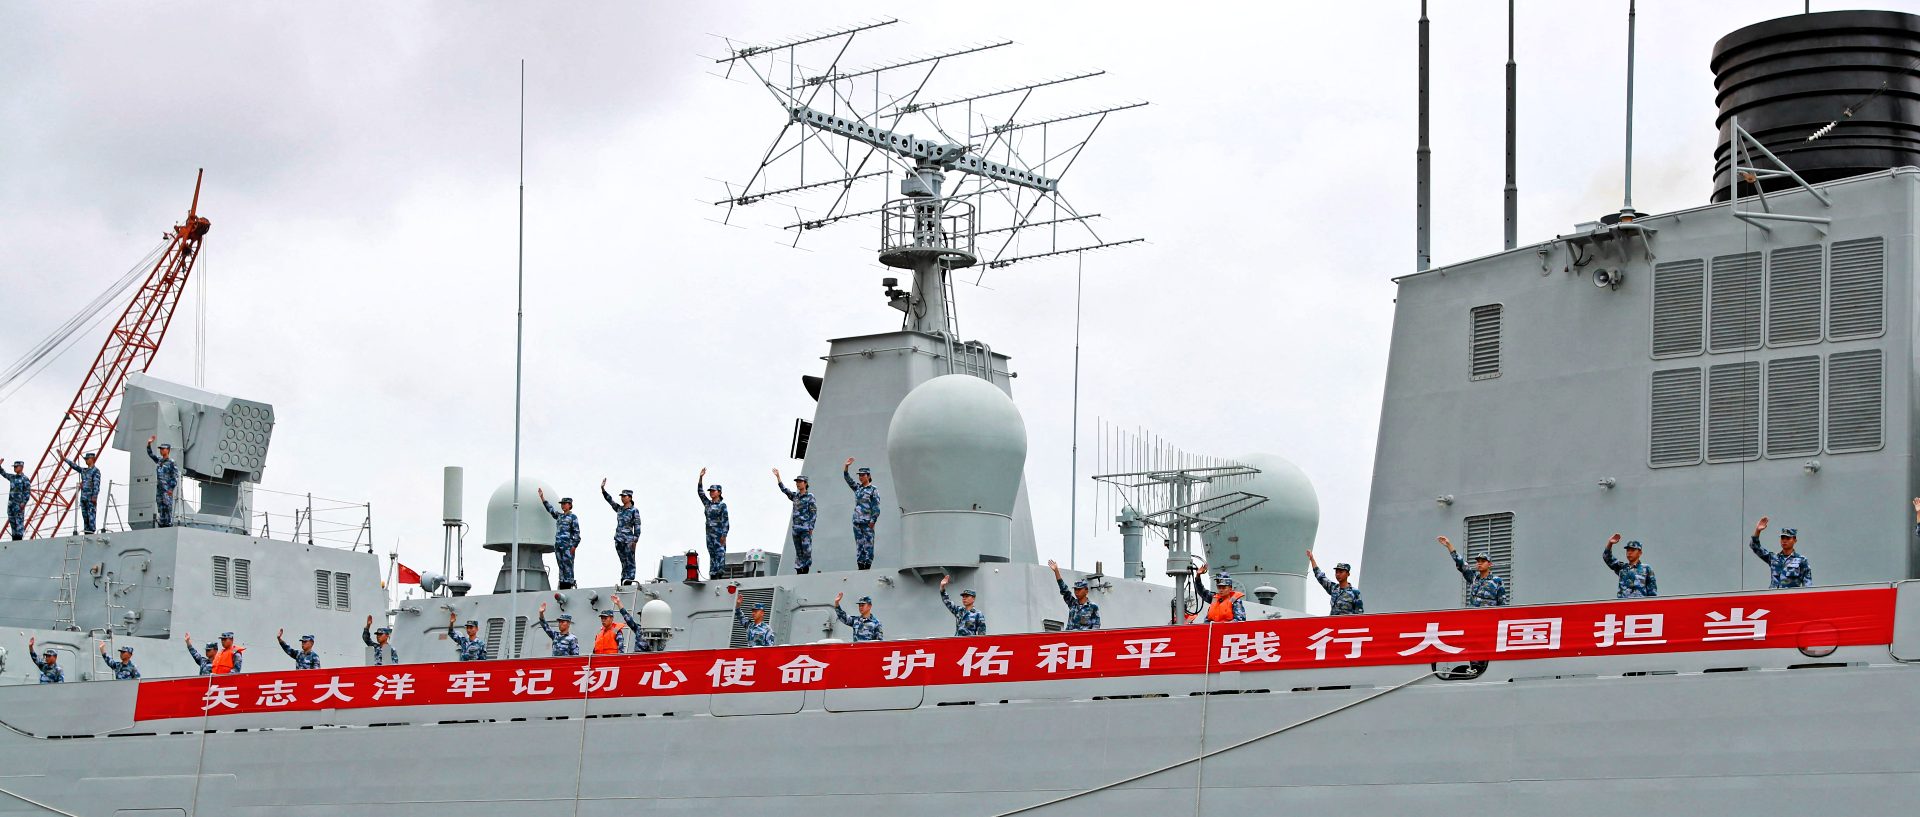 A Chinese warship